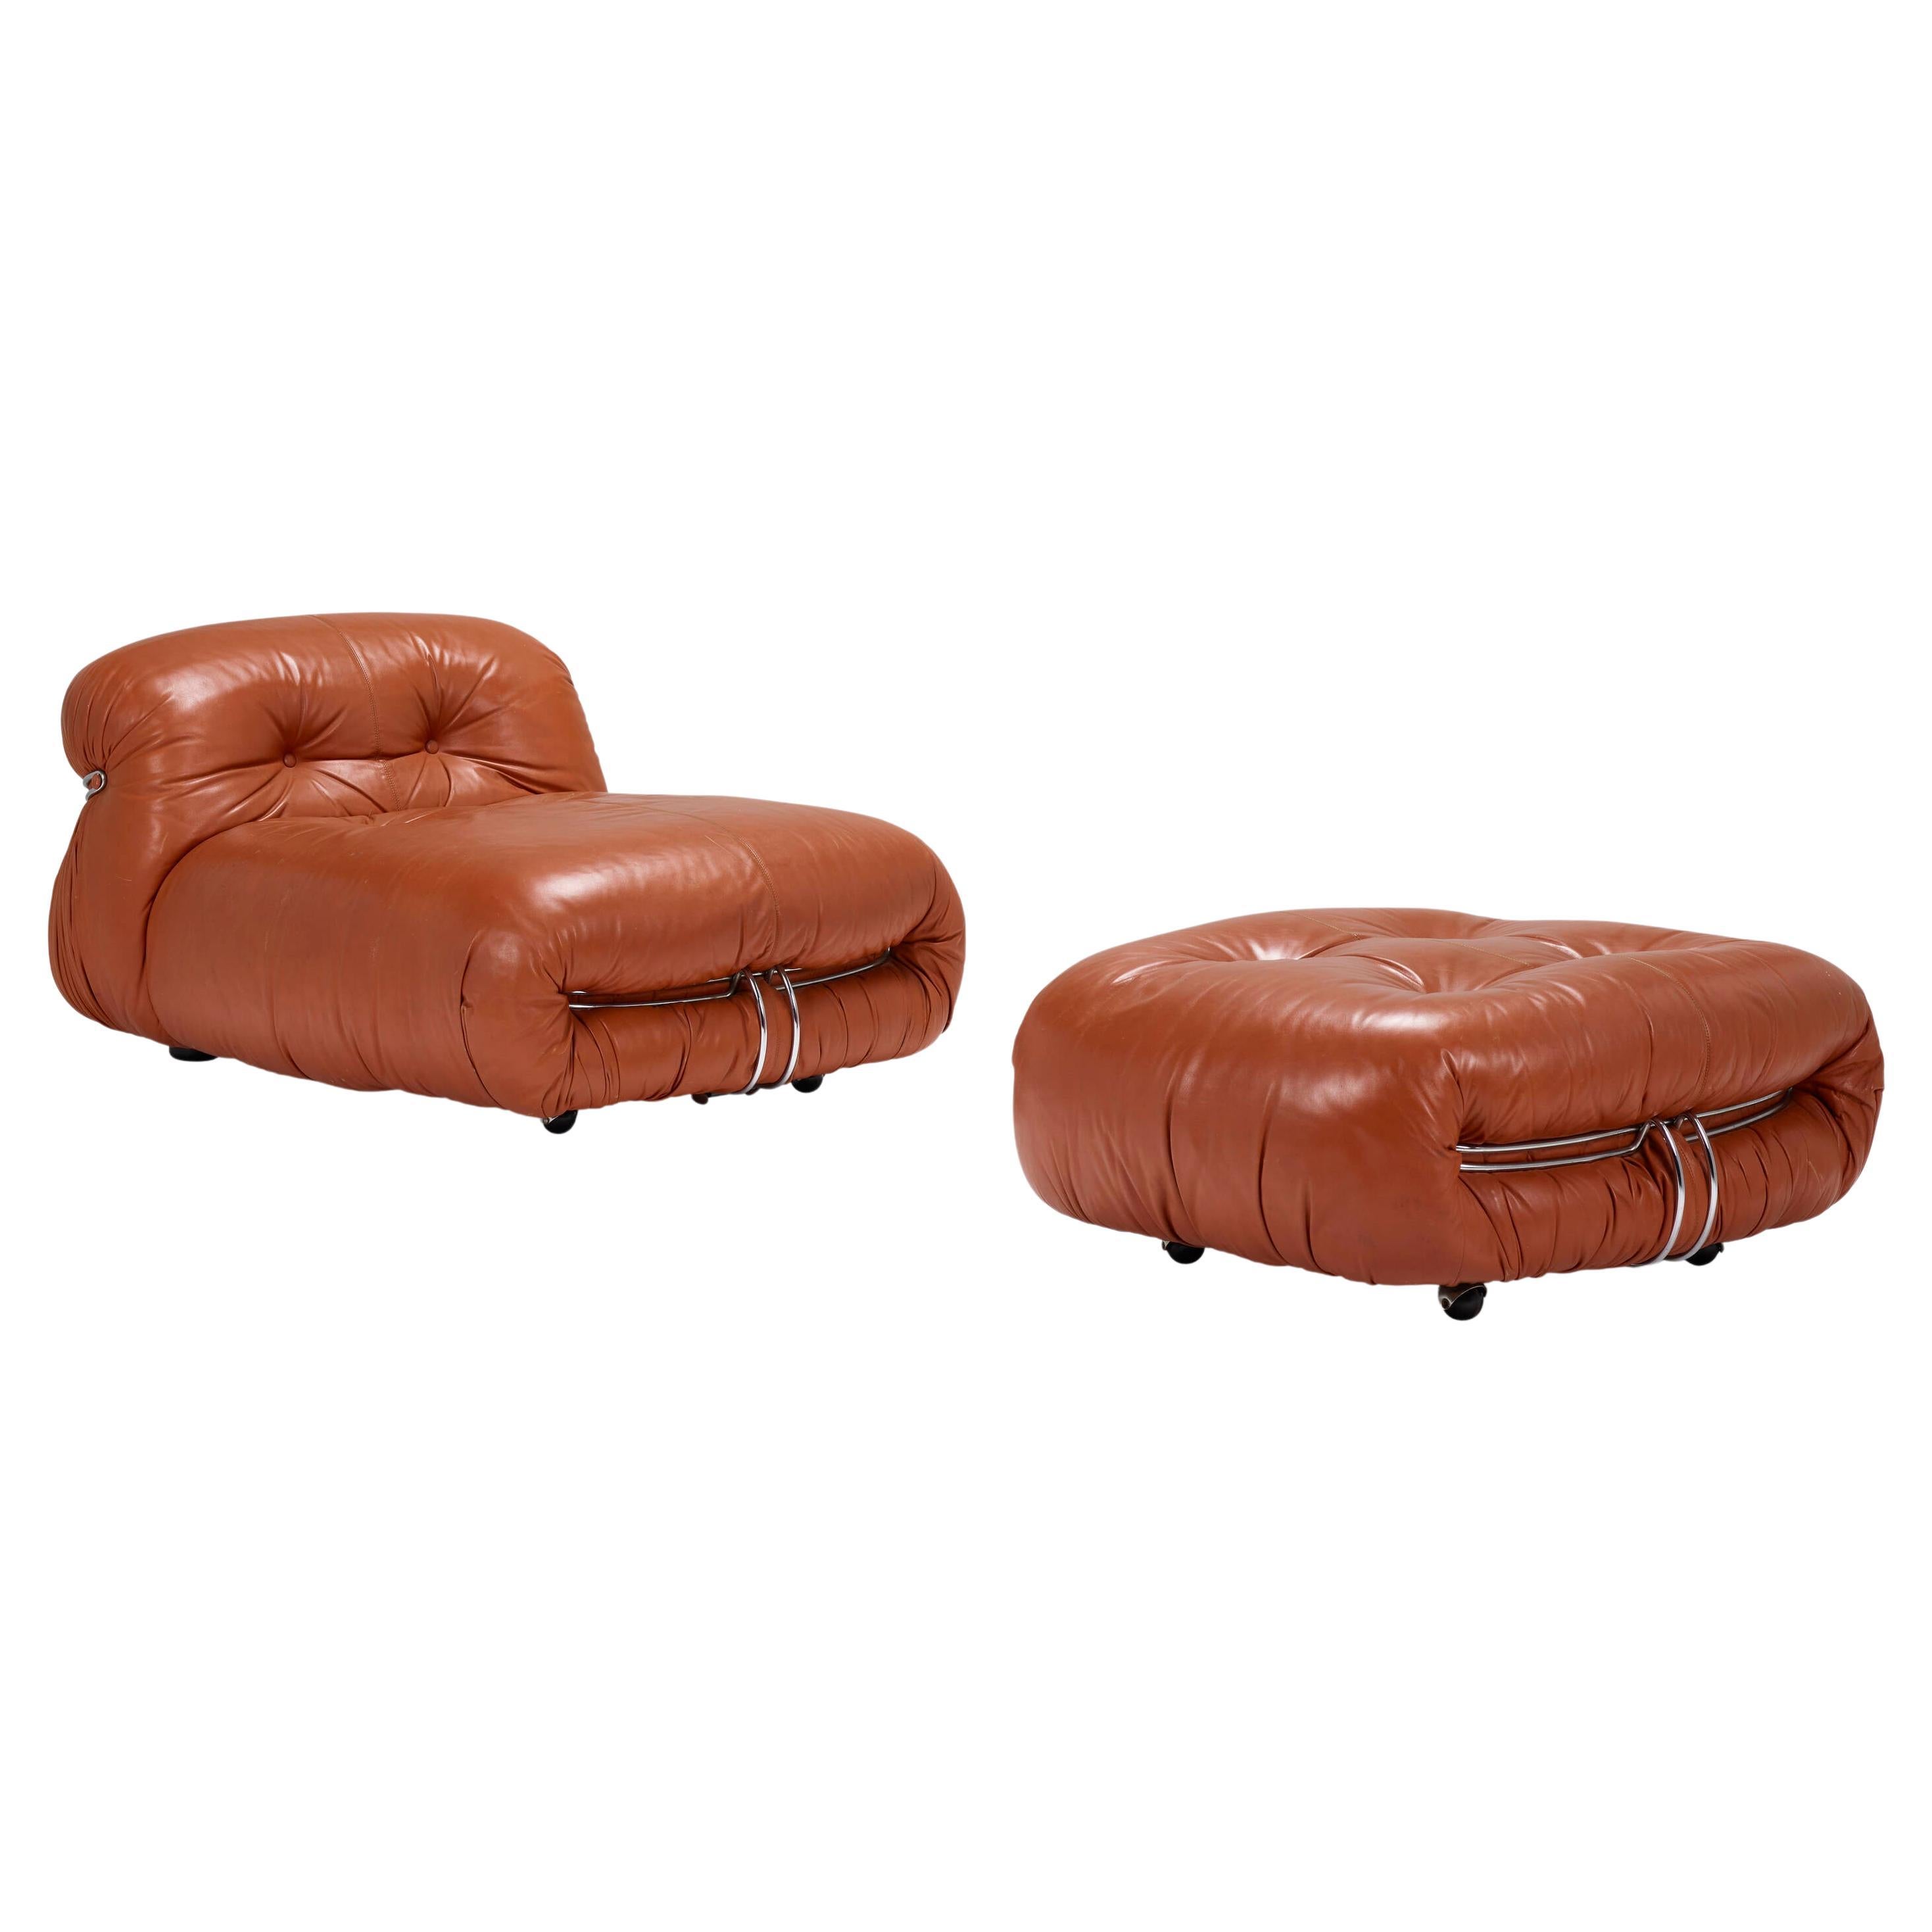 Afra and Tobia Scarpa Soriana lounge chair and ottoman in great condition. Decal manufacturer's and distributor's labels to underside of each example 'Cassina Made in Italy' and 'Made in Italy for AI Atelier International Limited'.

Leather,